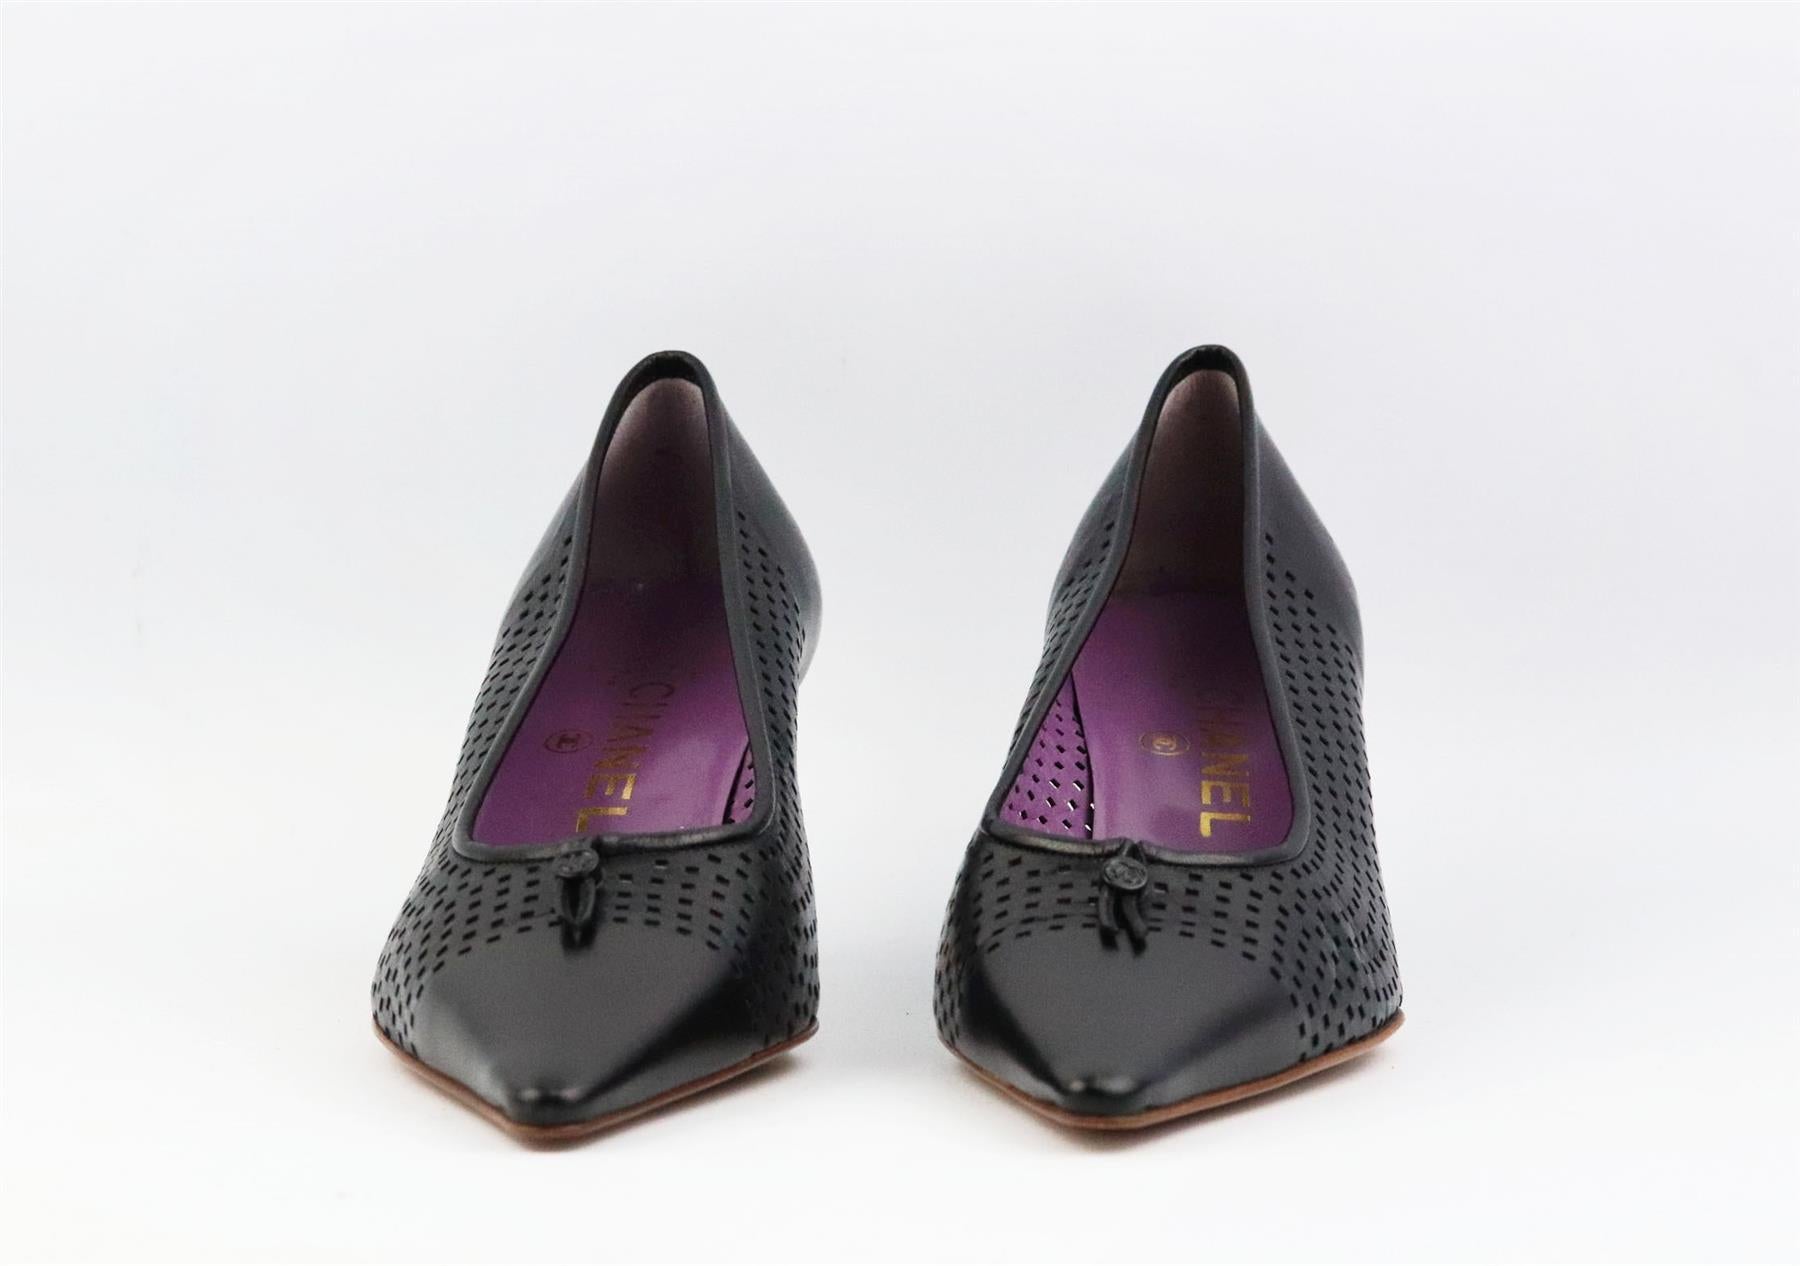 These vintage pumps by Chanel have been made in Italy from black perforated leather, they're set on a small structured stiletto heel that's balanced with a pointed toe and drawstring CC detail on the front. Heel measures approximately 50 mm/ 2